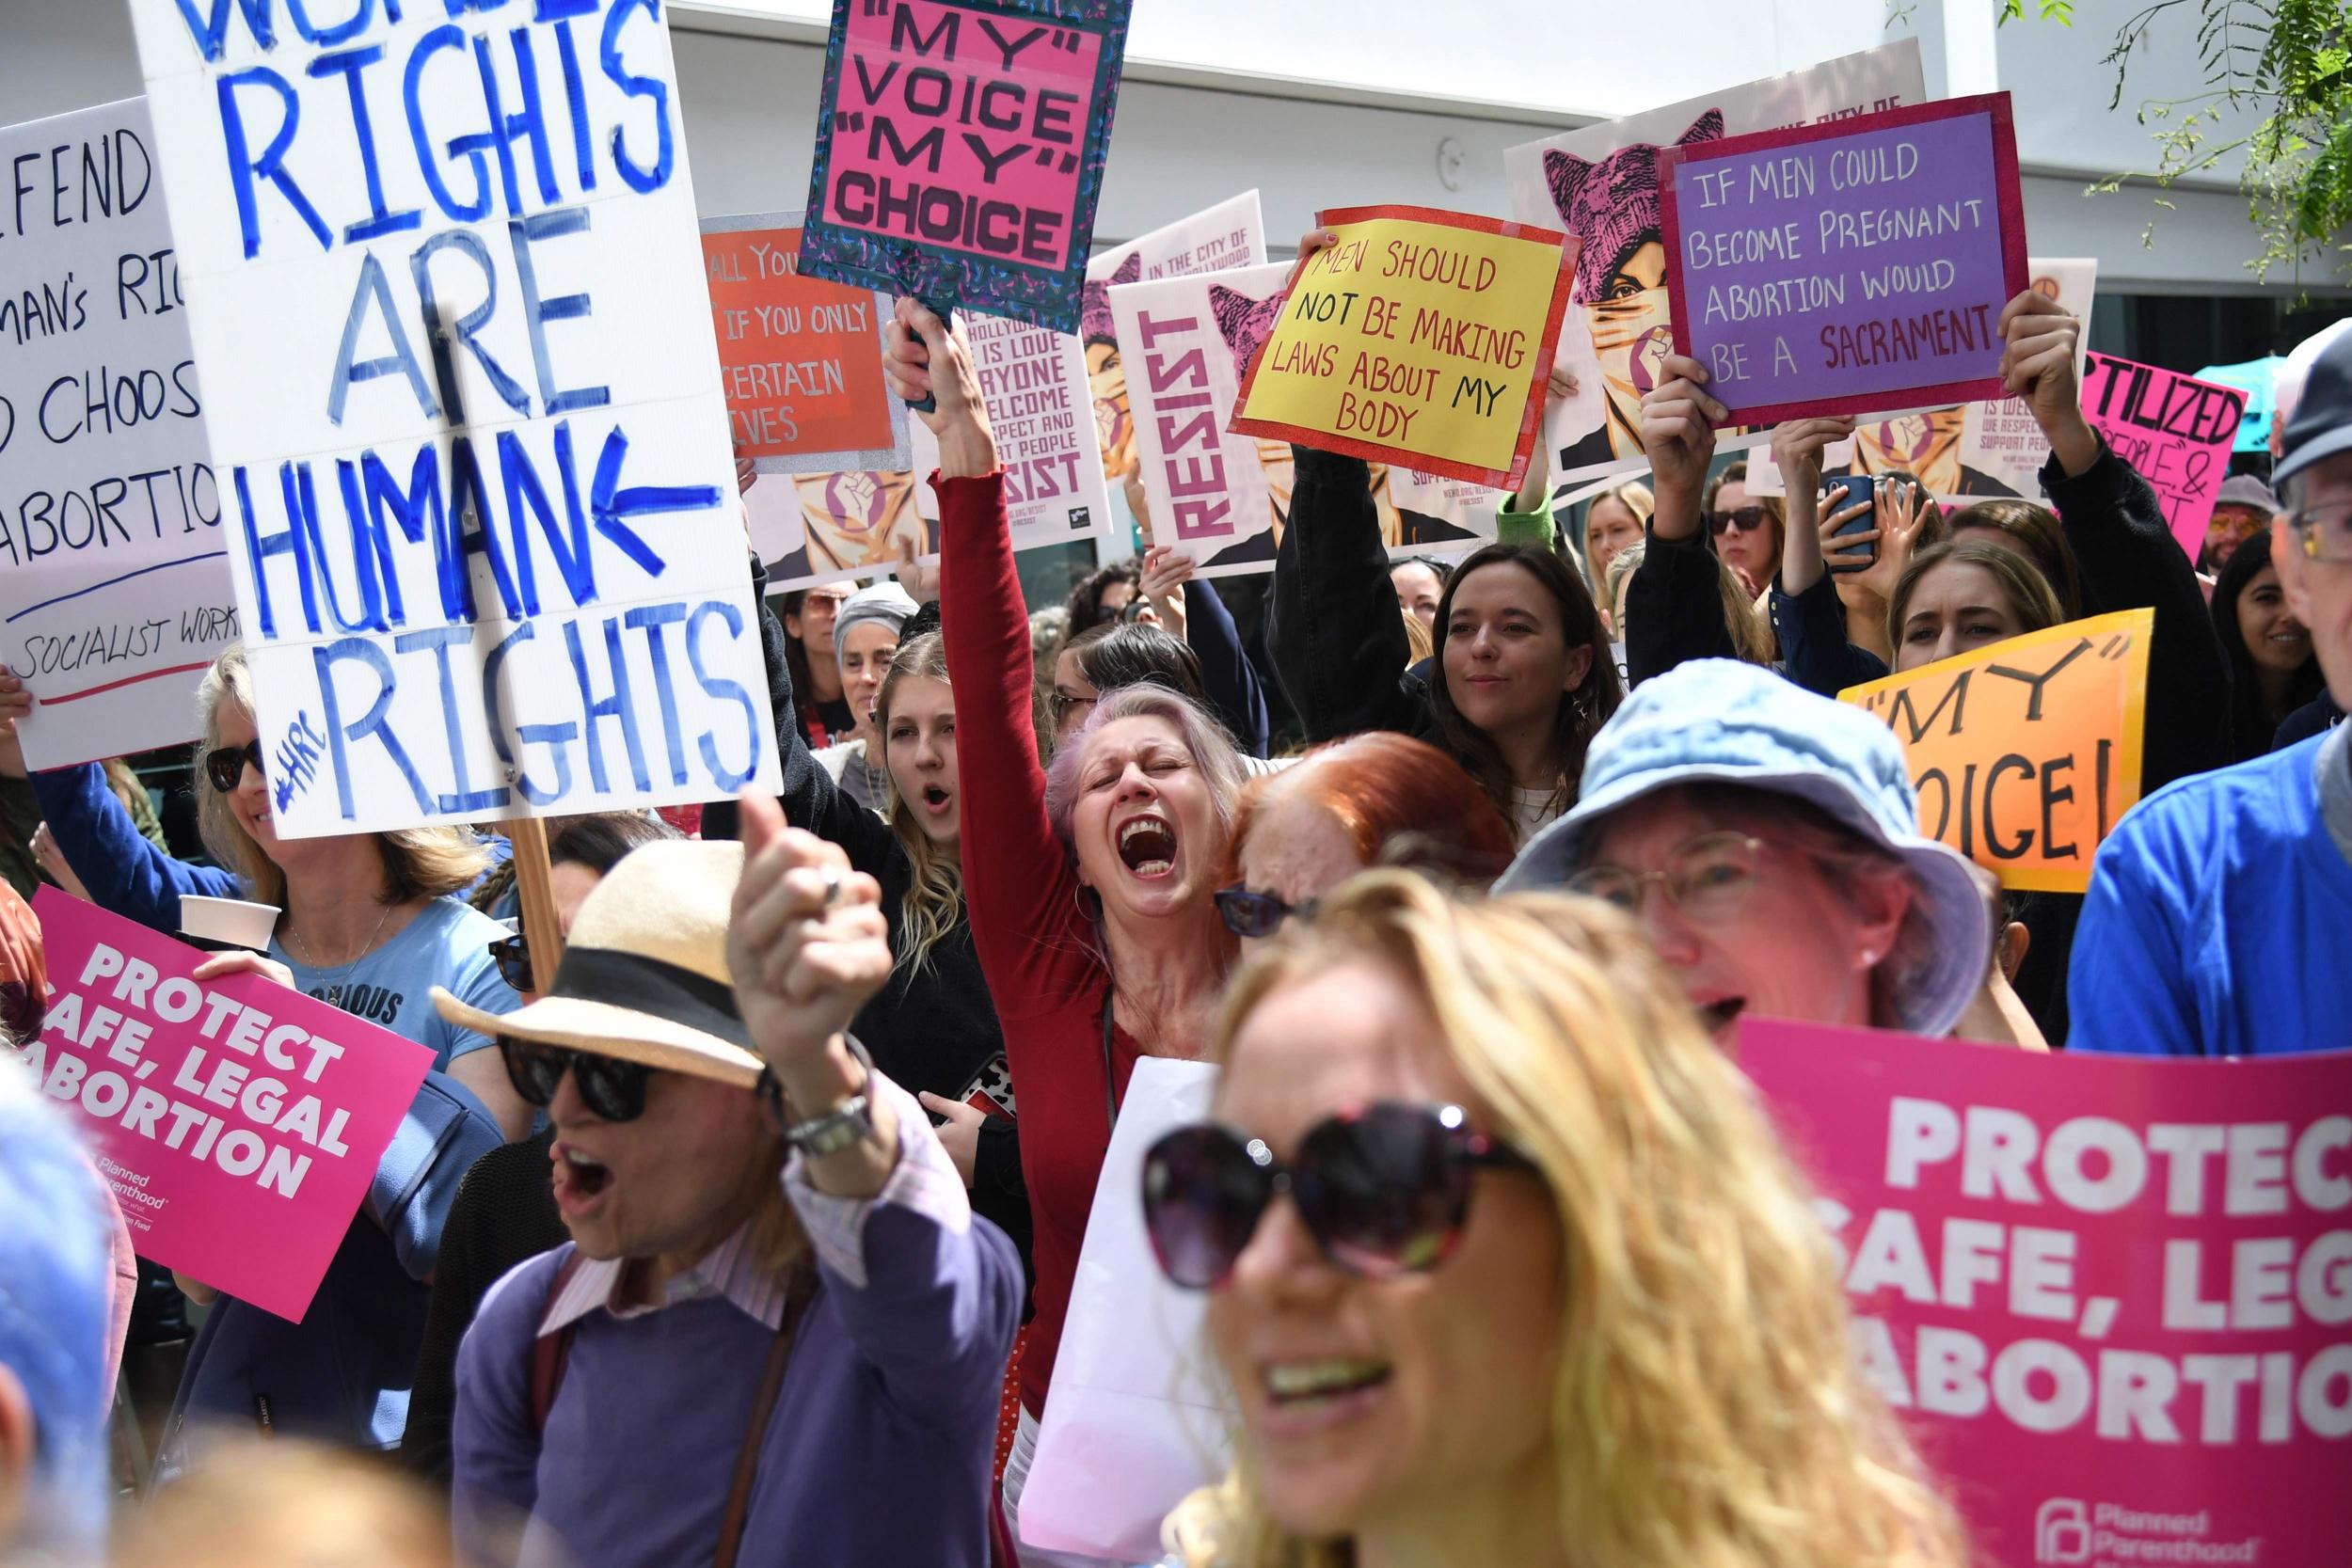 Abortion ban protests: Thousands demonstrate against new restrictive laws across America